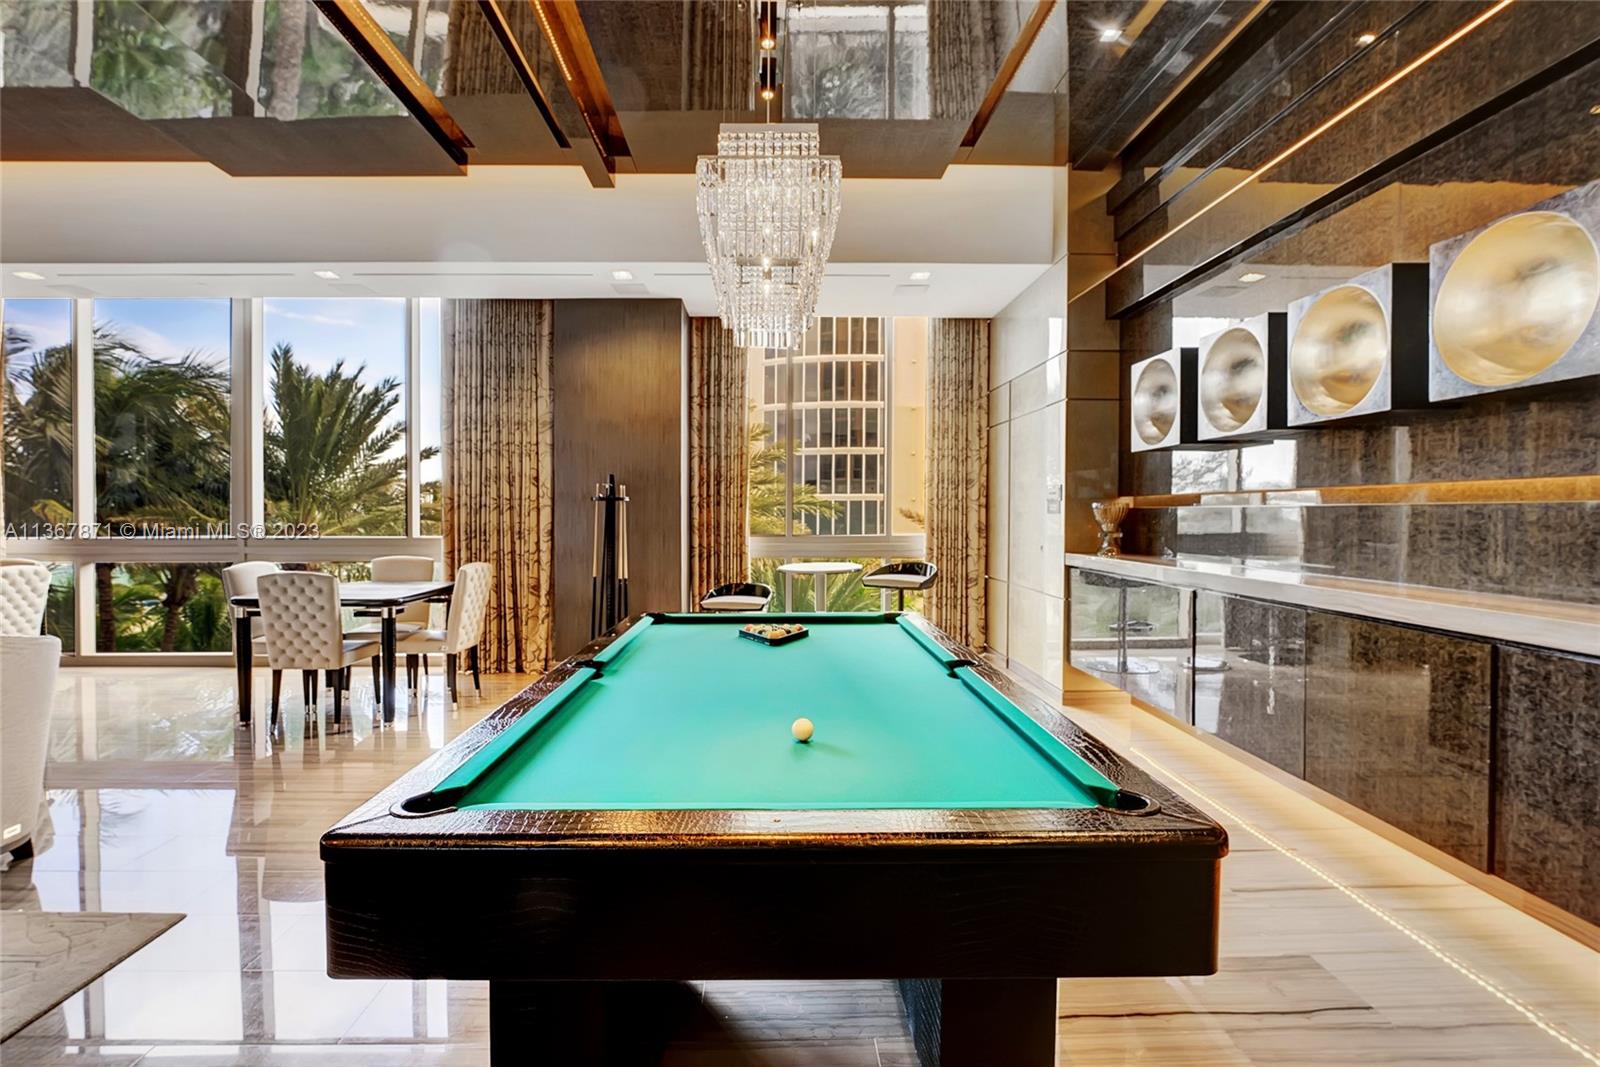 Owners private entertaining room with a piano, billiard area and wine room.